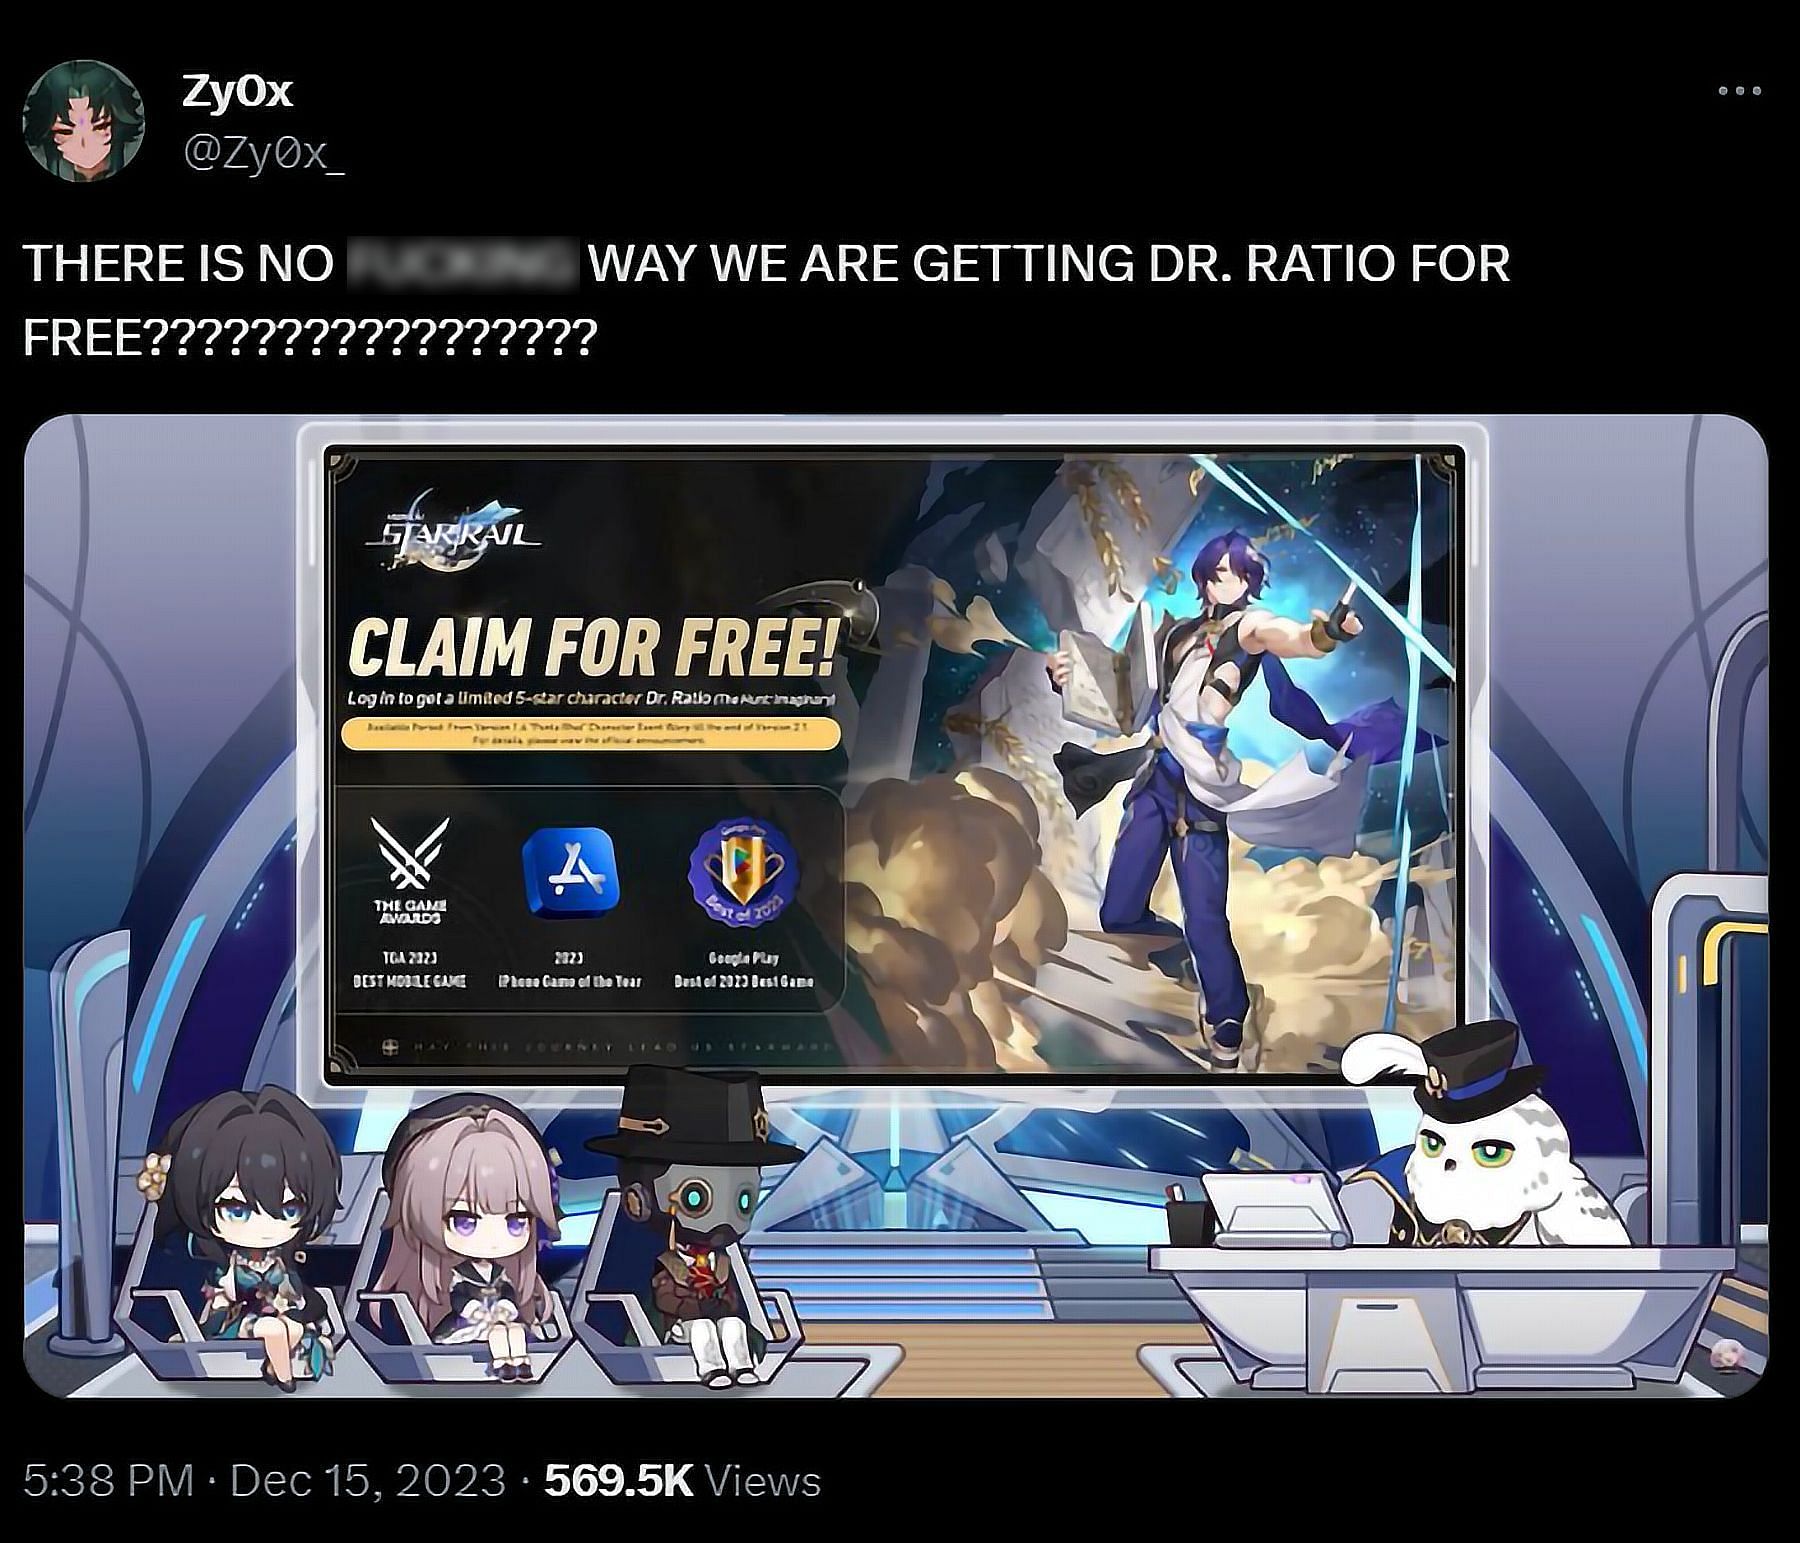 Zy0x reaction to free Dr. Ratio (Image via X/Zy0x)